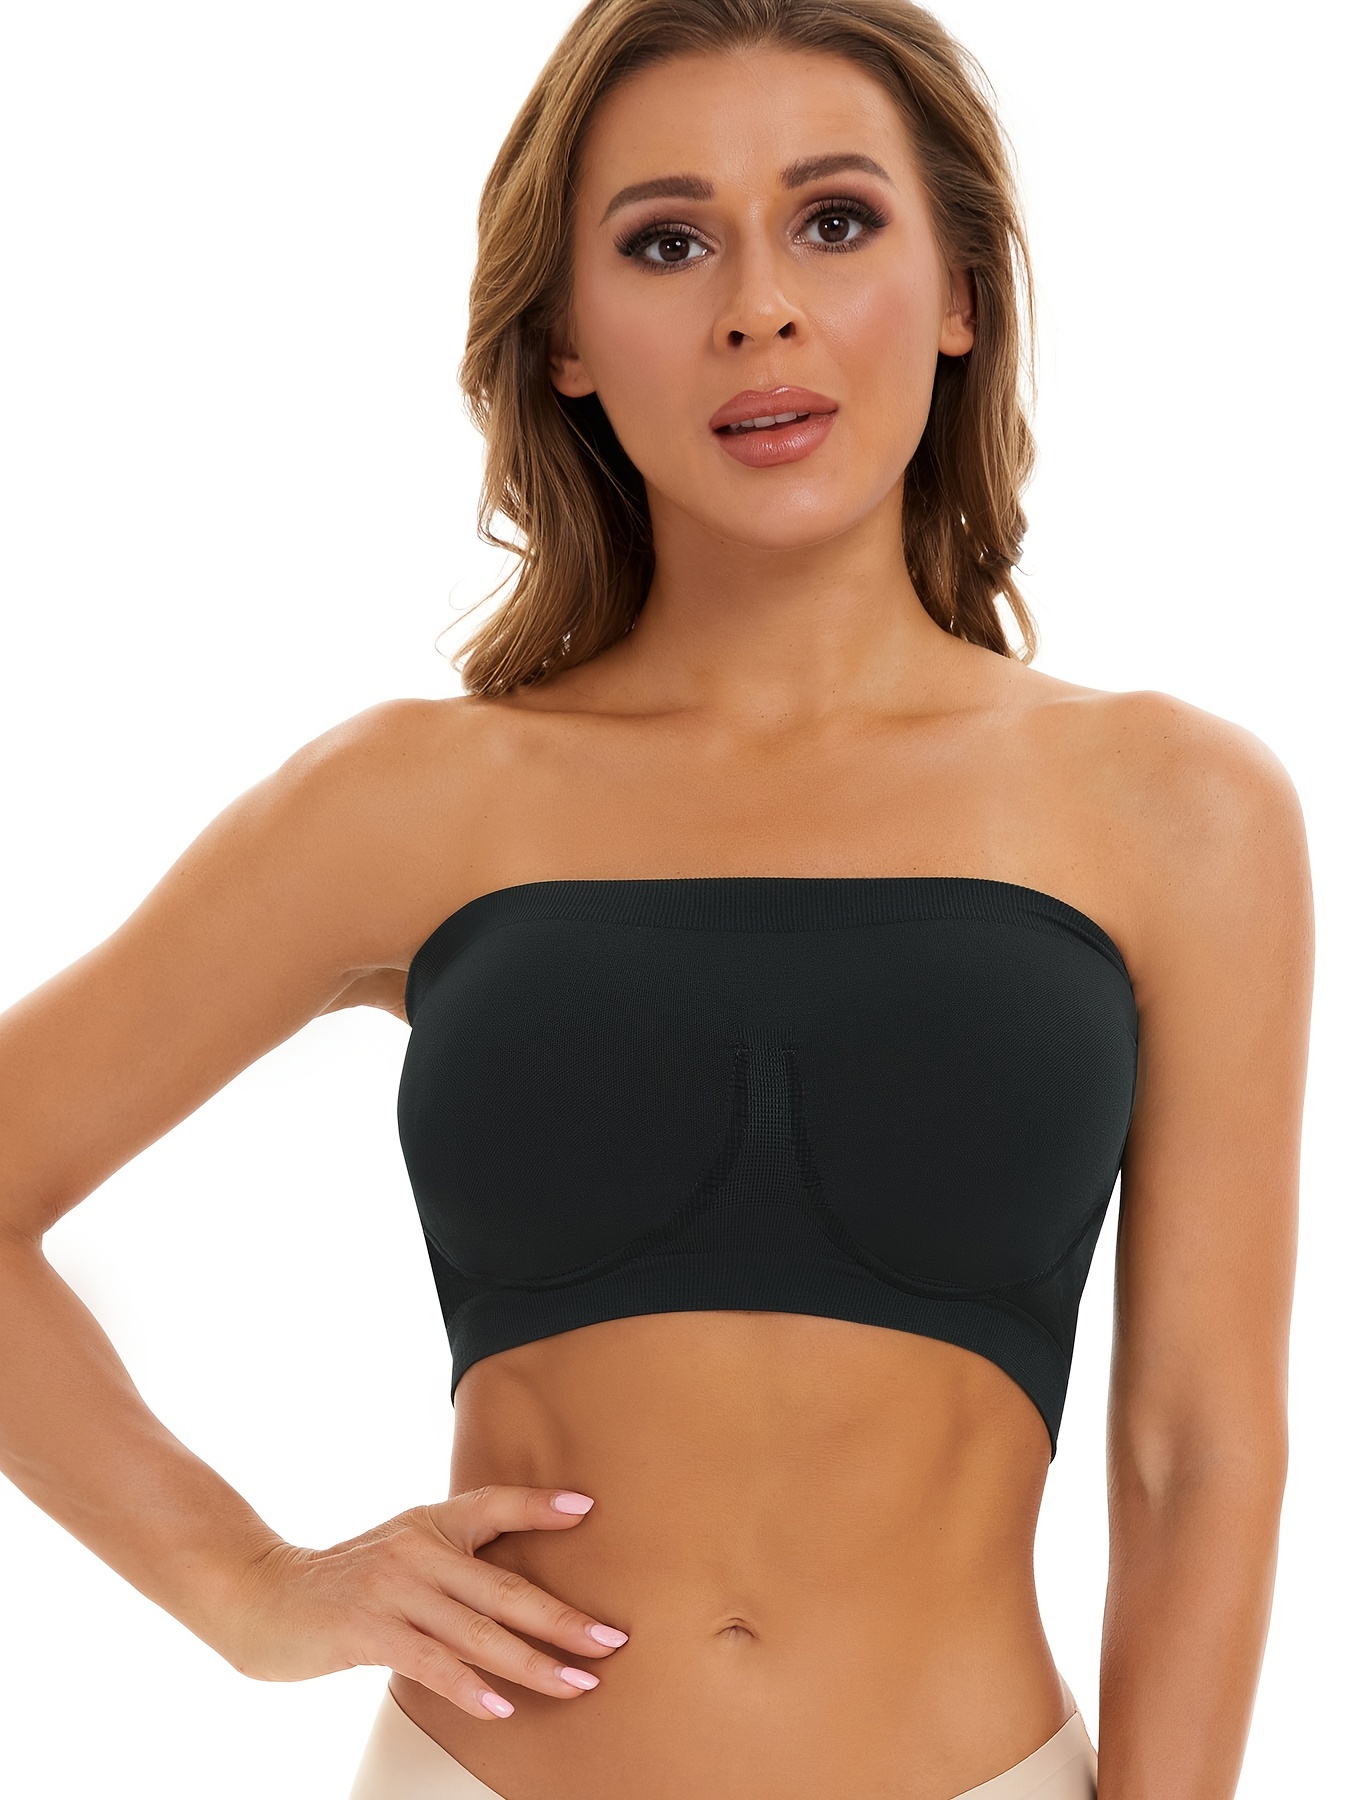 Pack of 5 Compression Tube Bras for Women Strapless and Breathable Ladies  Undergarments